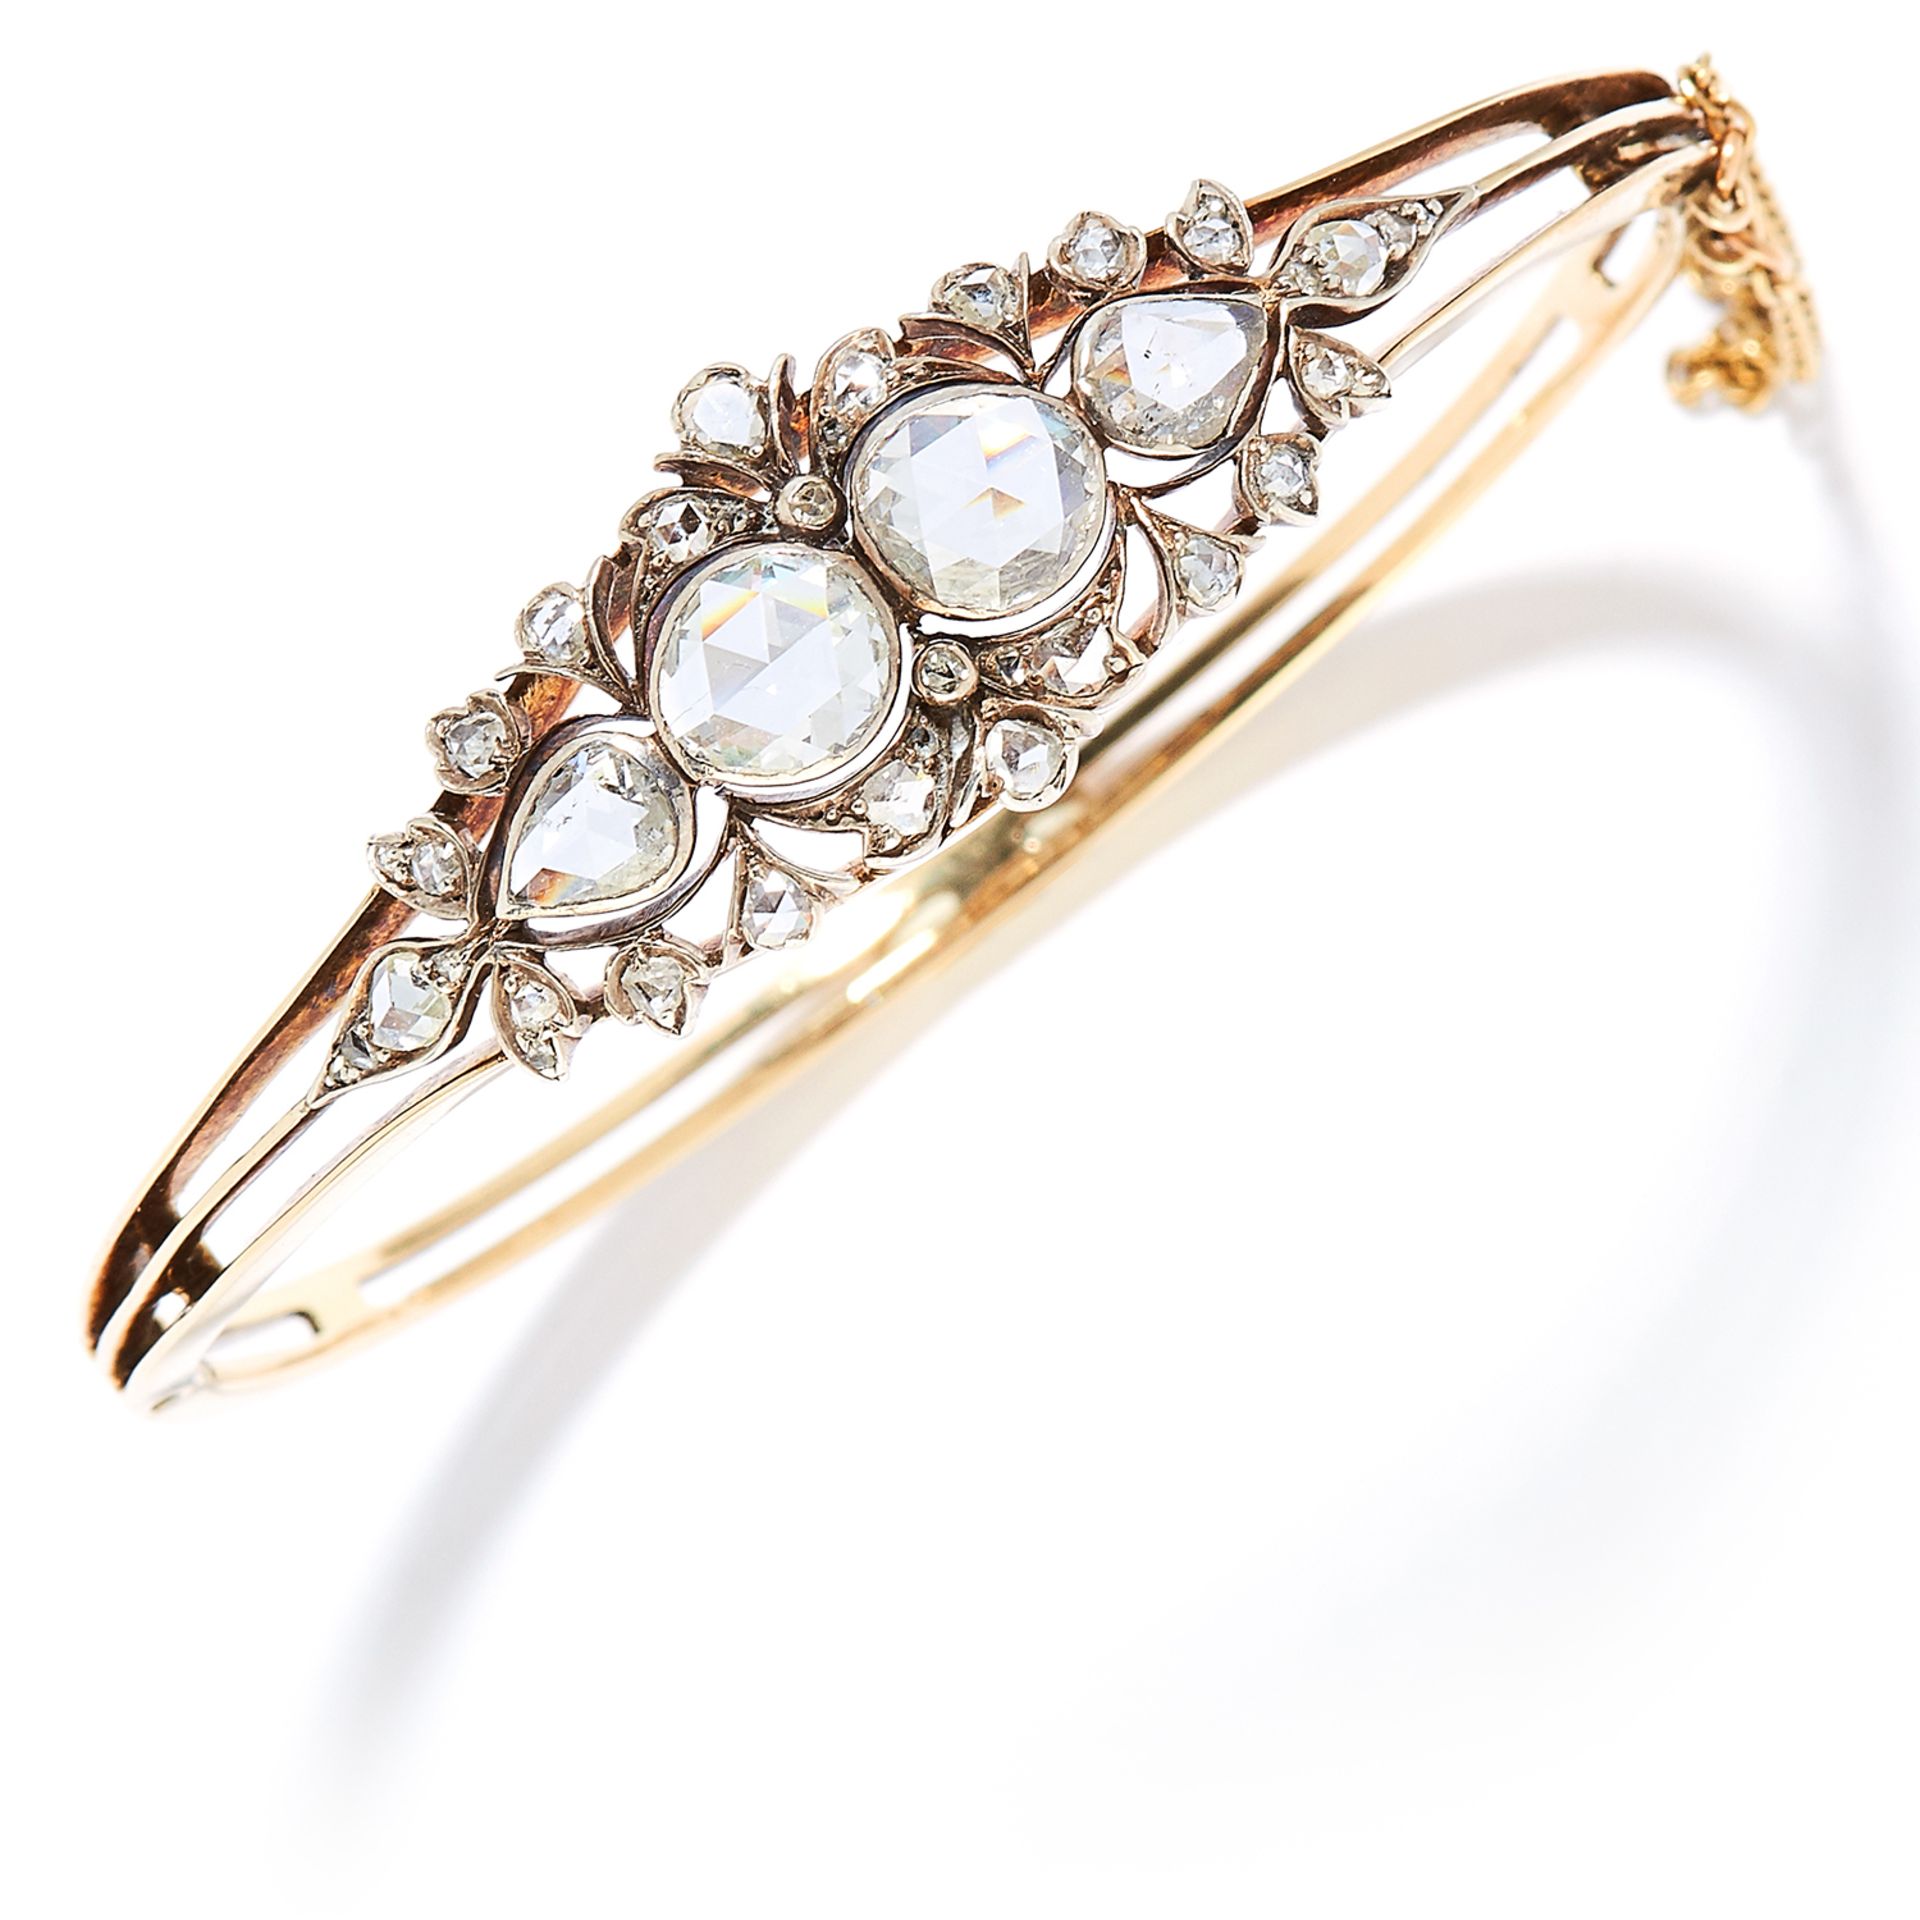 ANTIQUE DIAMOND BANGLE in yellow gold, set with rose cut diamonds totalling approximately 2.30